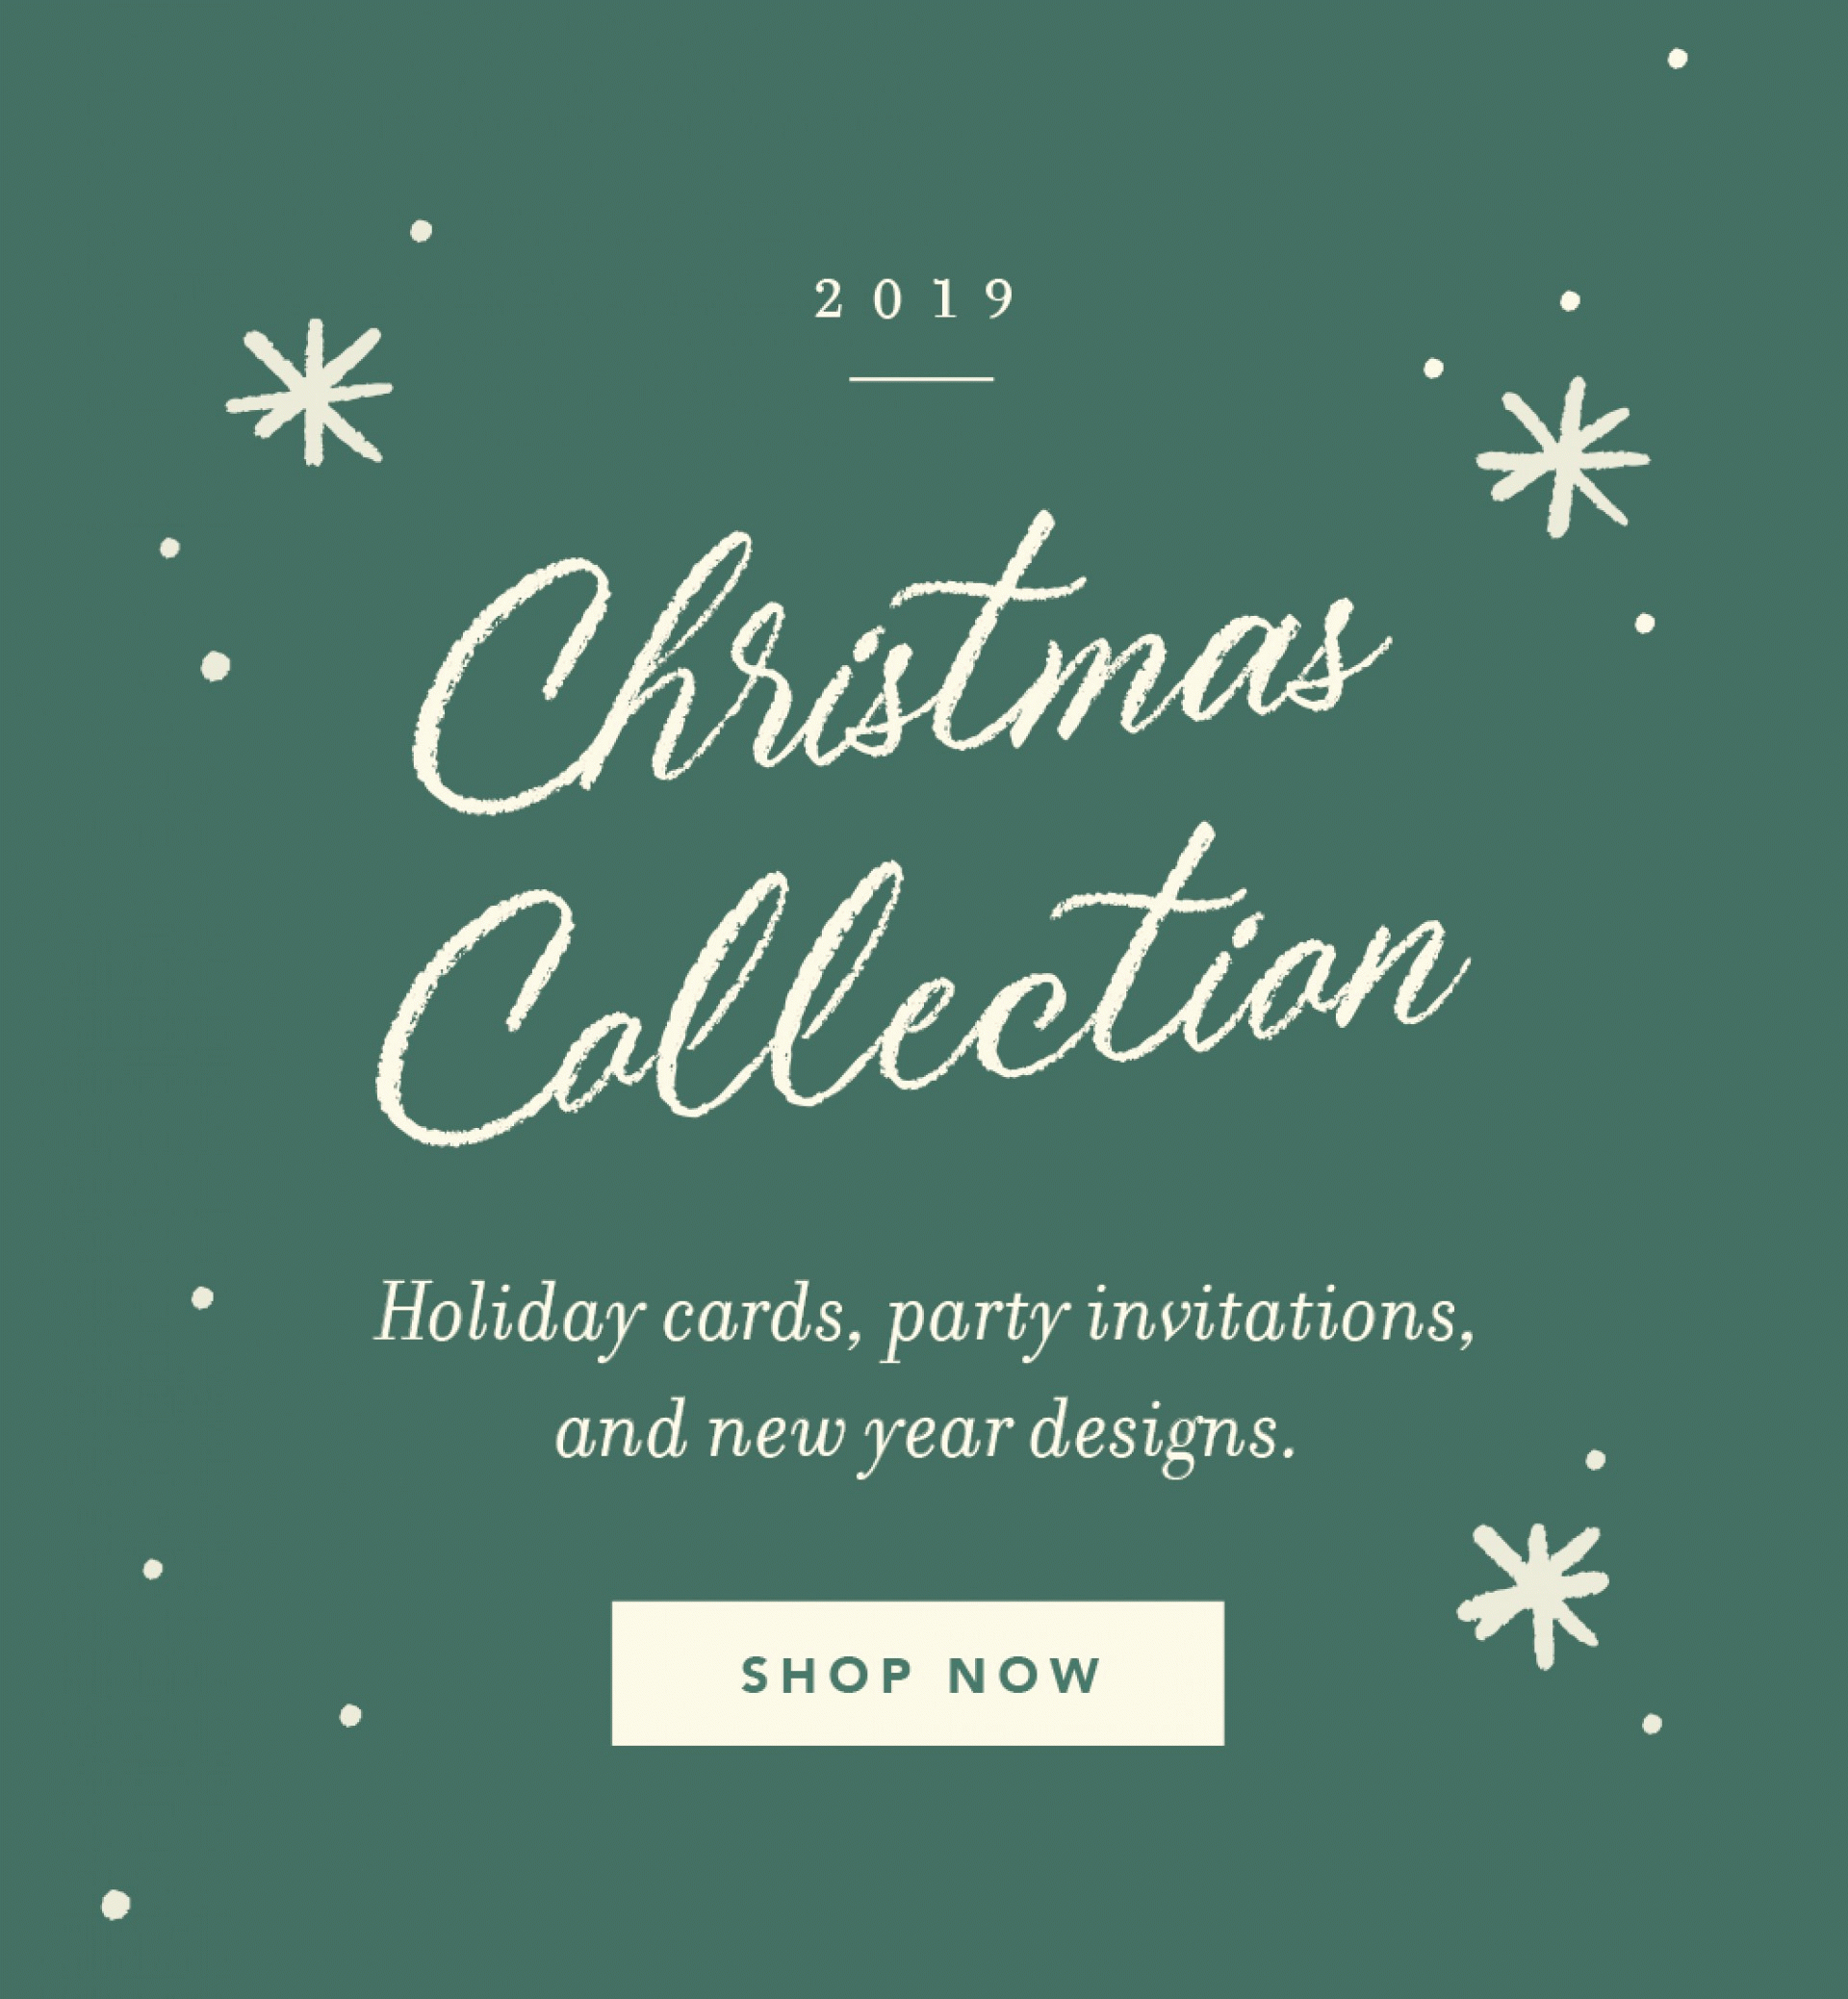 009 Free Holiday Party Invitation Templates Powerpoint Intended For Save The Date Powerpoint Template